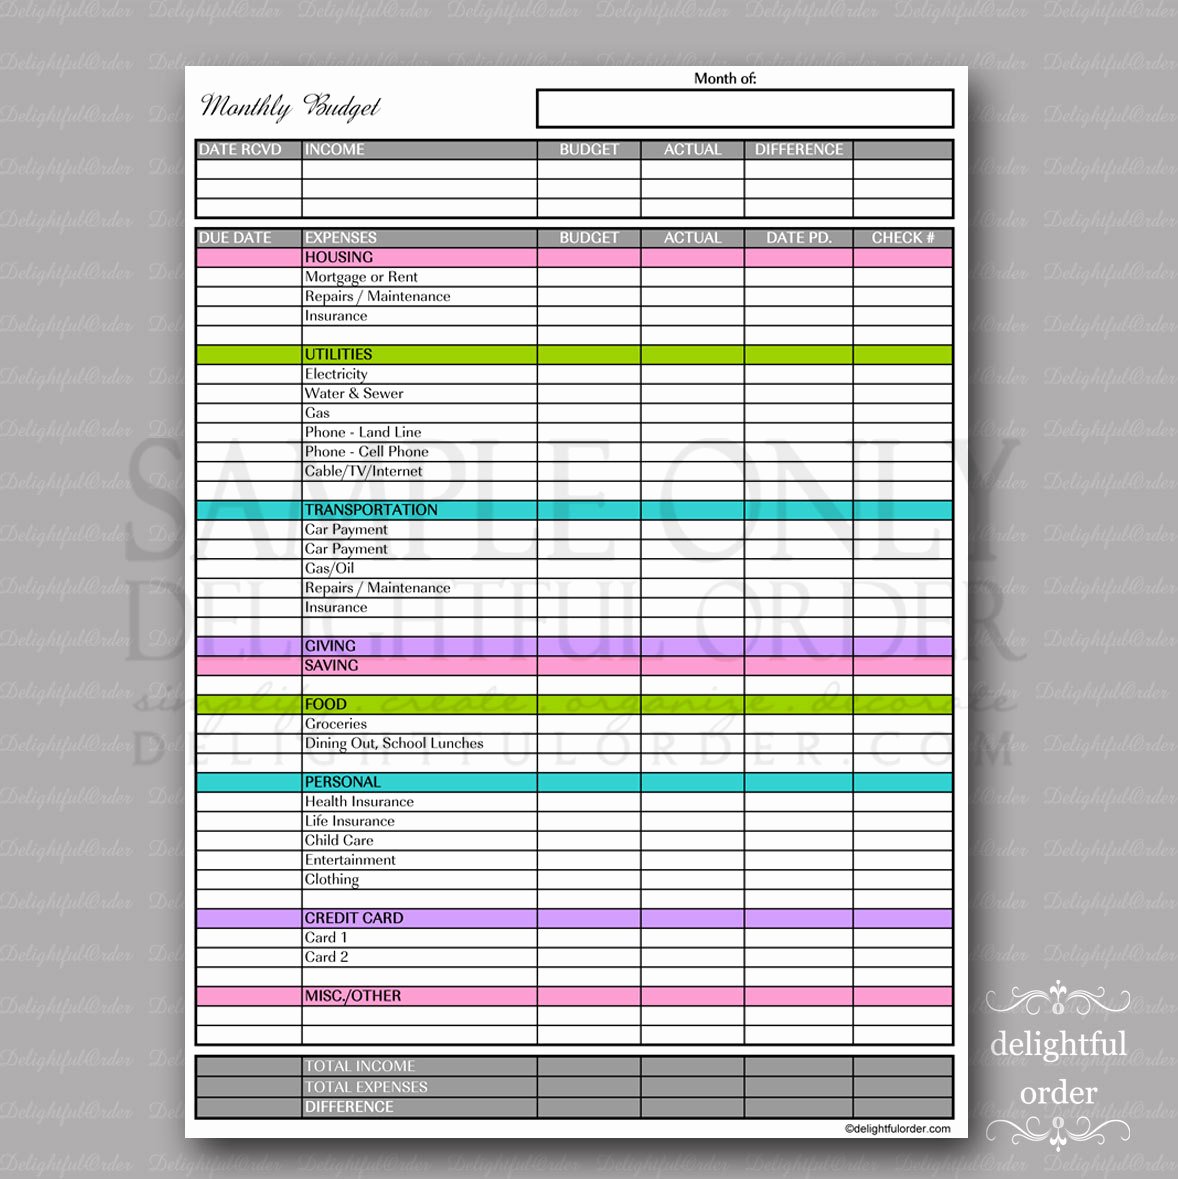 Monthly Budget Worksheet Pdf Unique Colorful Monthly Bud form Pdf Printable by Delightfulorder